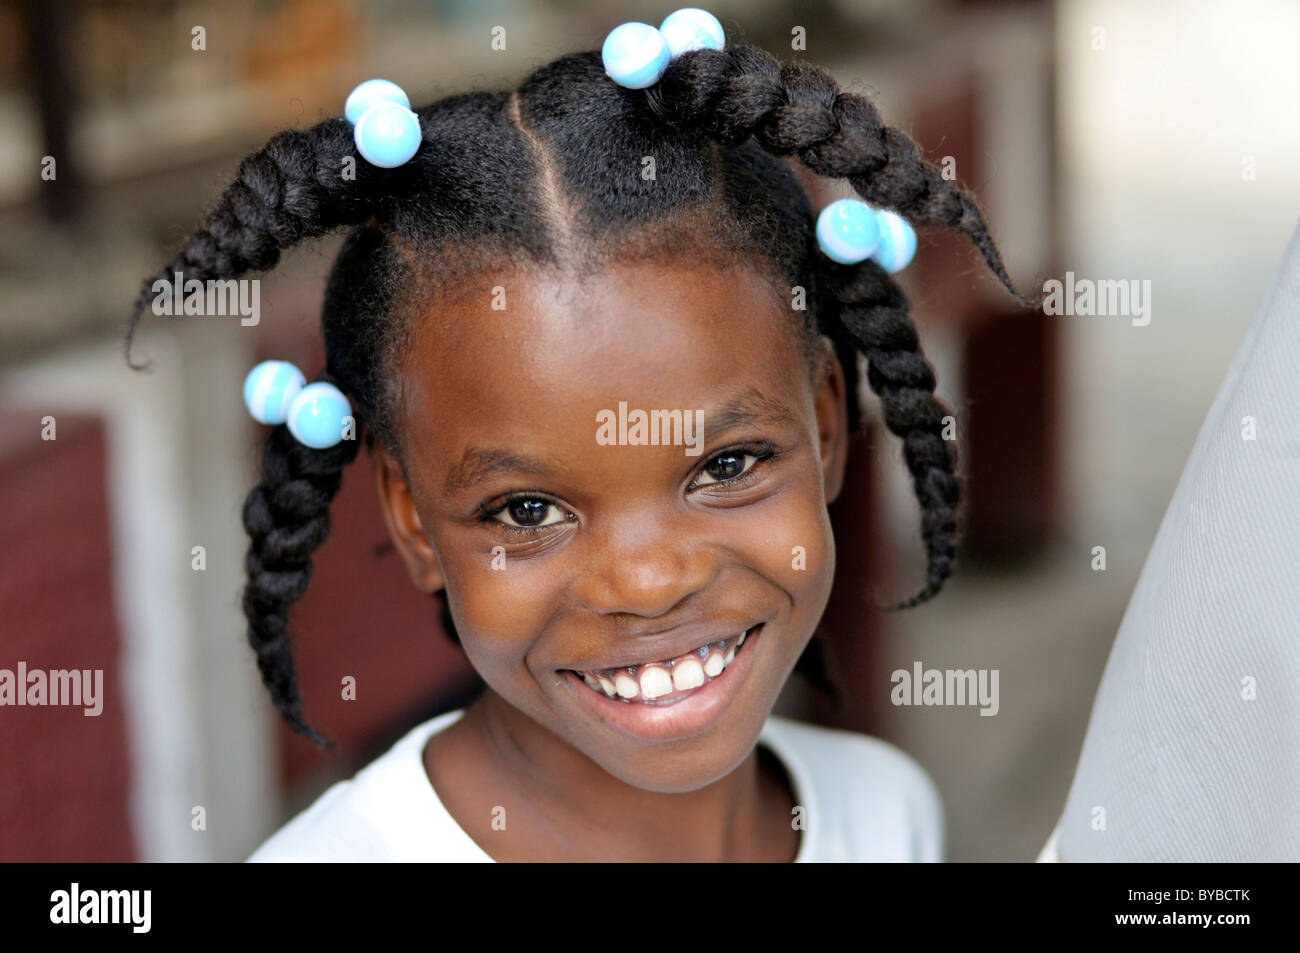 Portrait of a smiling girl with funny hairstyle, Delmas 89 district,  Port-au-Prince, Haiti, Caribbean, Central America Stock Photo - Alamy